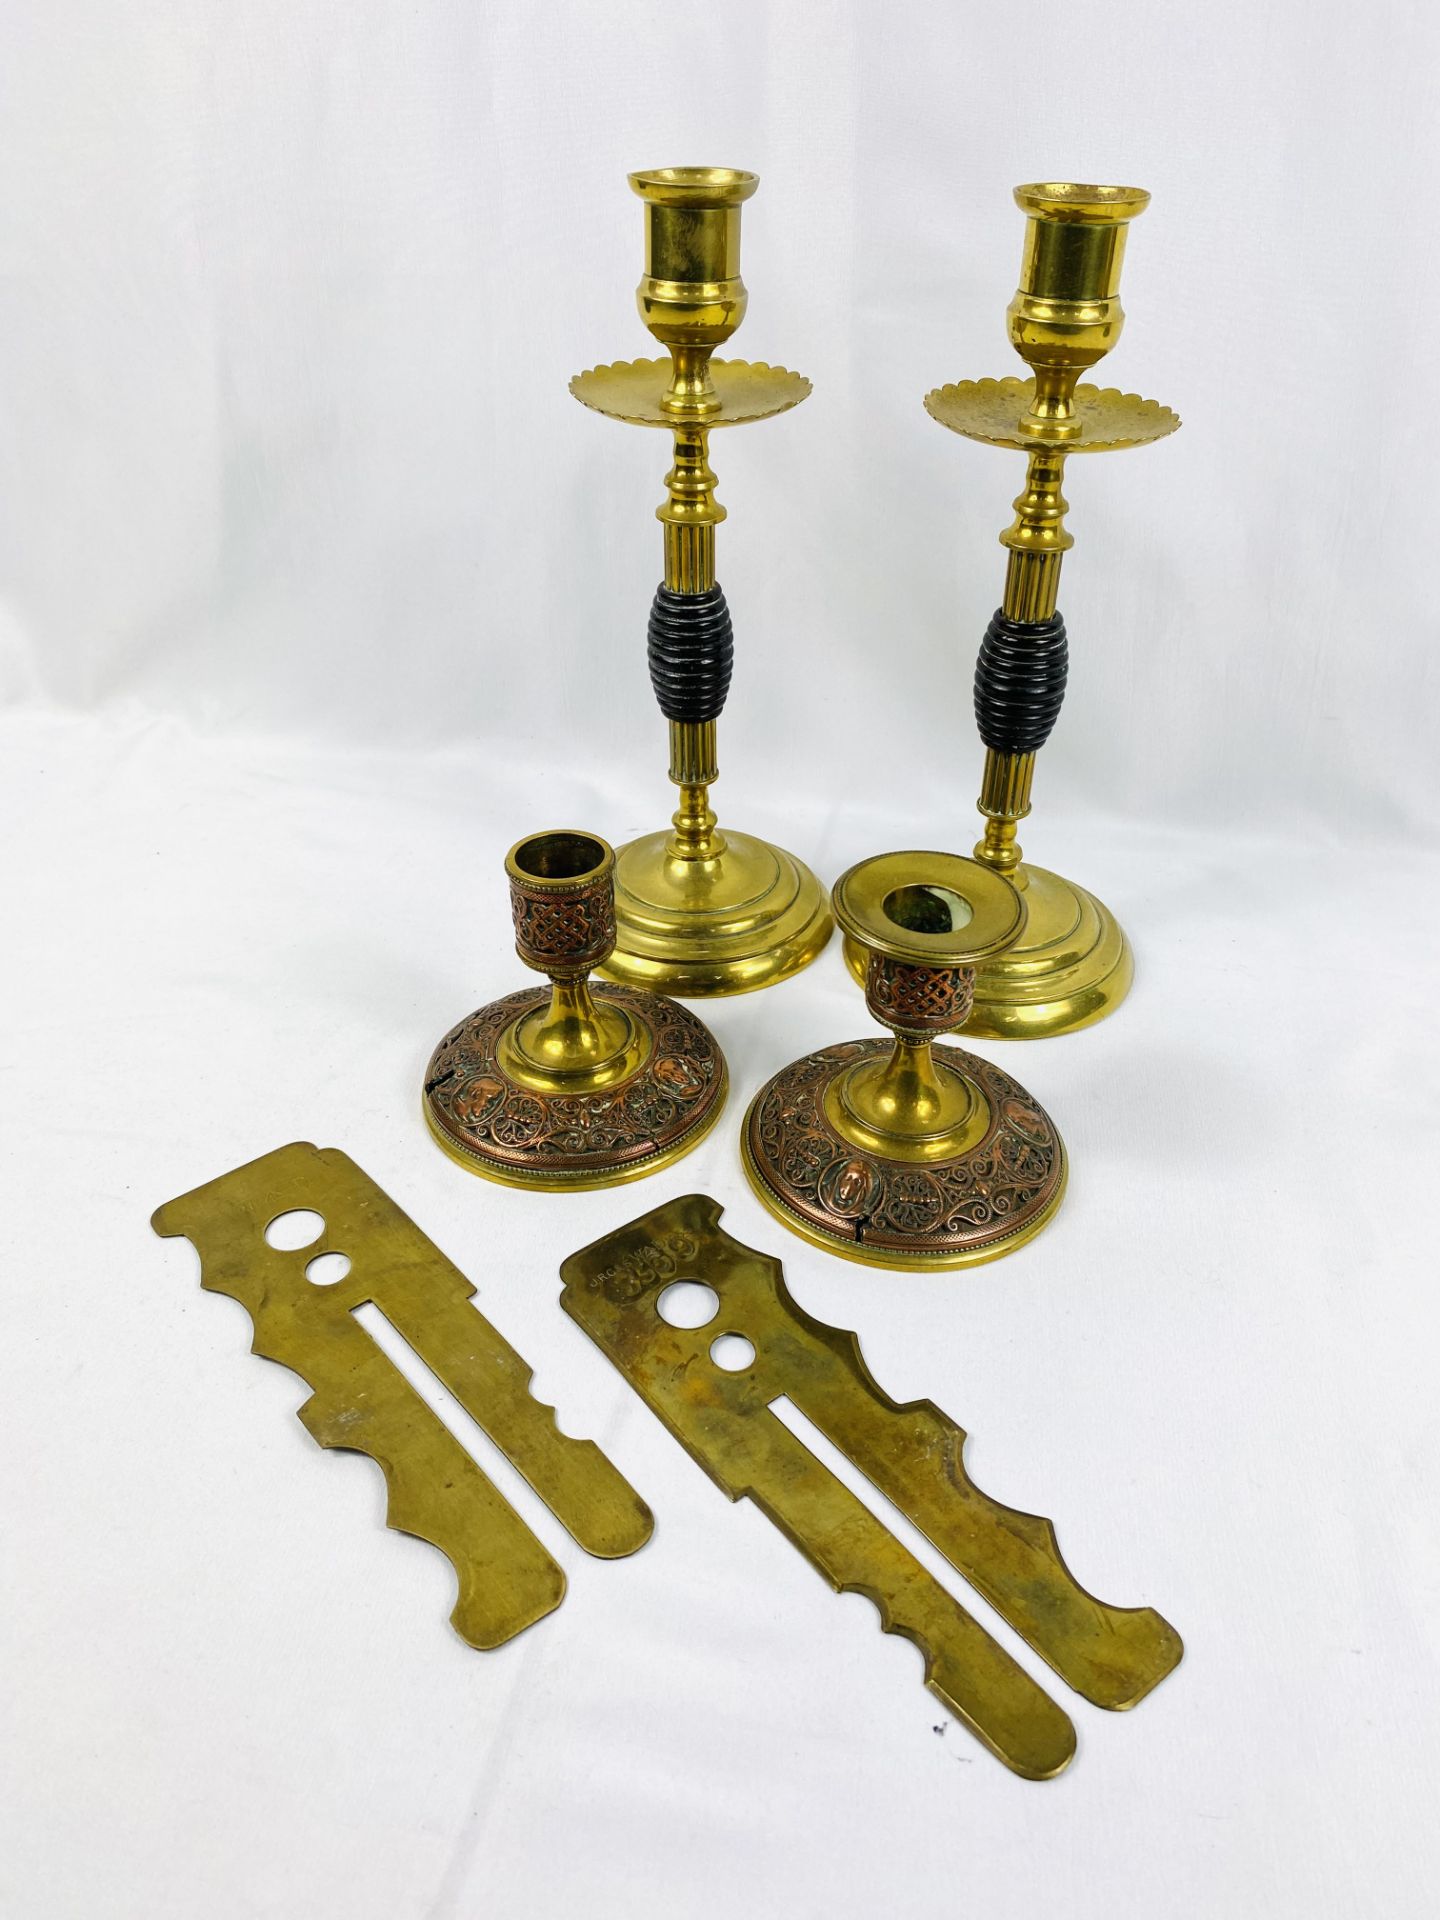 Pair of brass candlesticks and other items